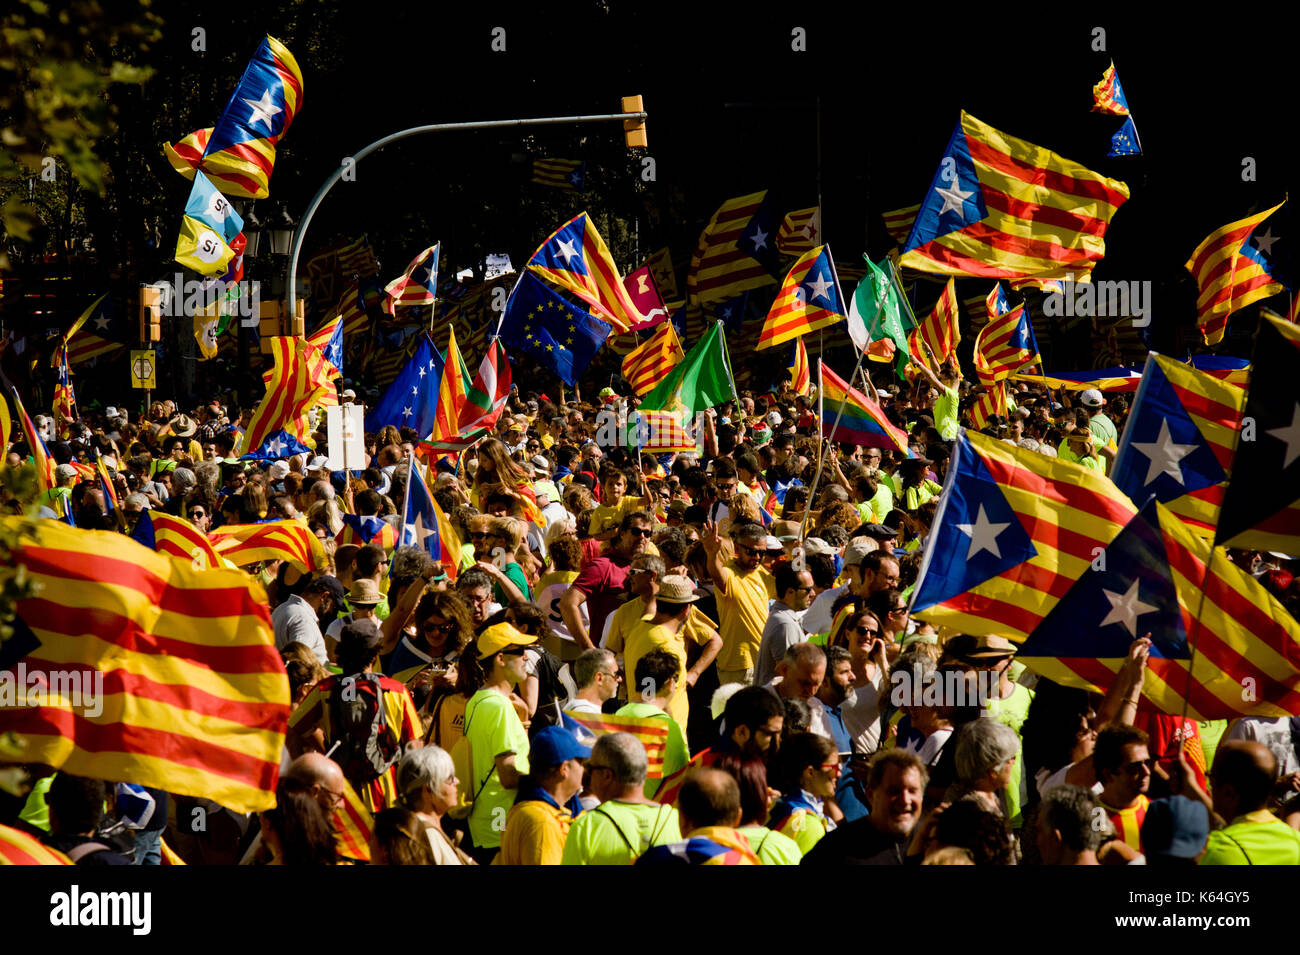 Barcelona, Catalonia, Spain. 11th Sep, 2017. In Barcelona, coinciding with Catalan national day or Diada, hundreds of thousands fill the streets demanding the independence of Catalonia. Catalan government aims to celebrate a referendum on independence next first october. Credit: Jordi Boixareu/ZUMA Wire/Alamy Live News Stock Photo